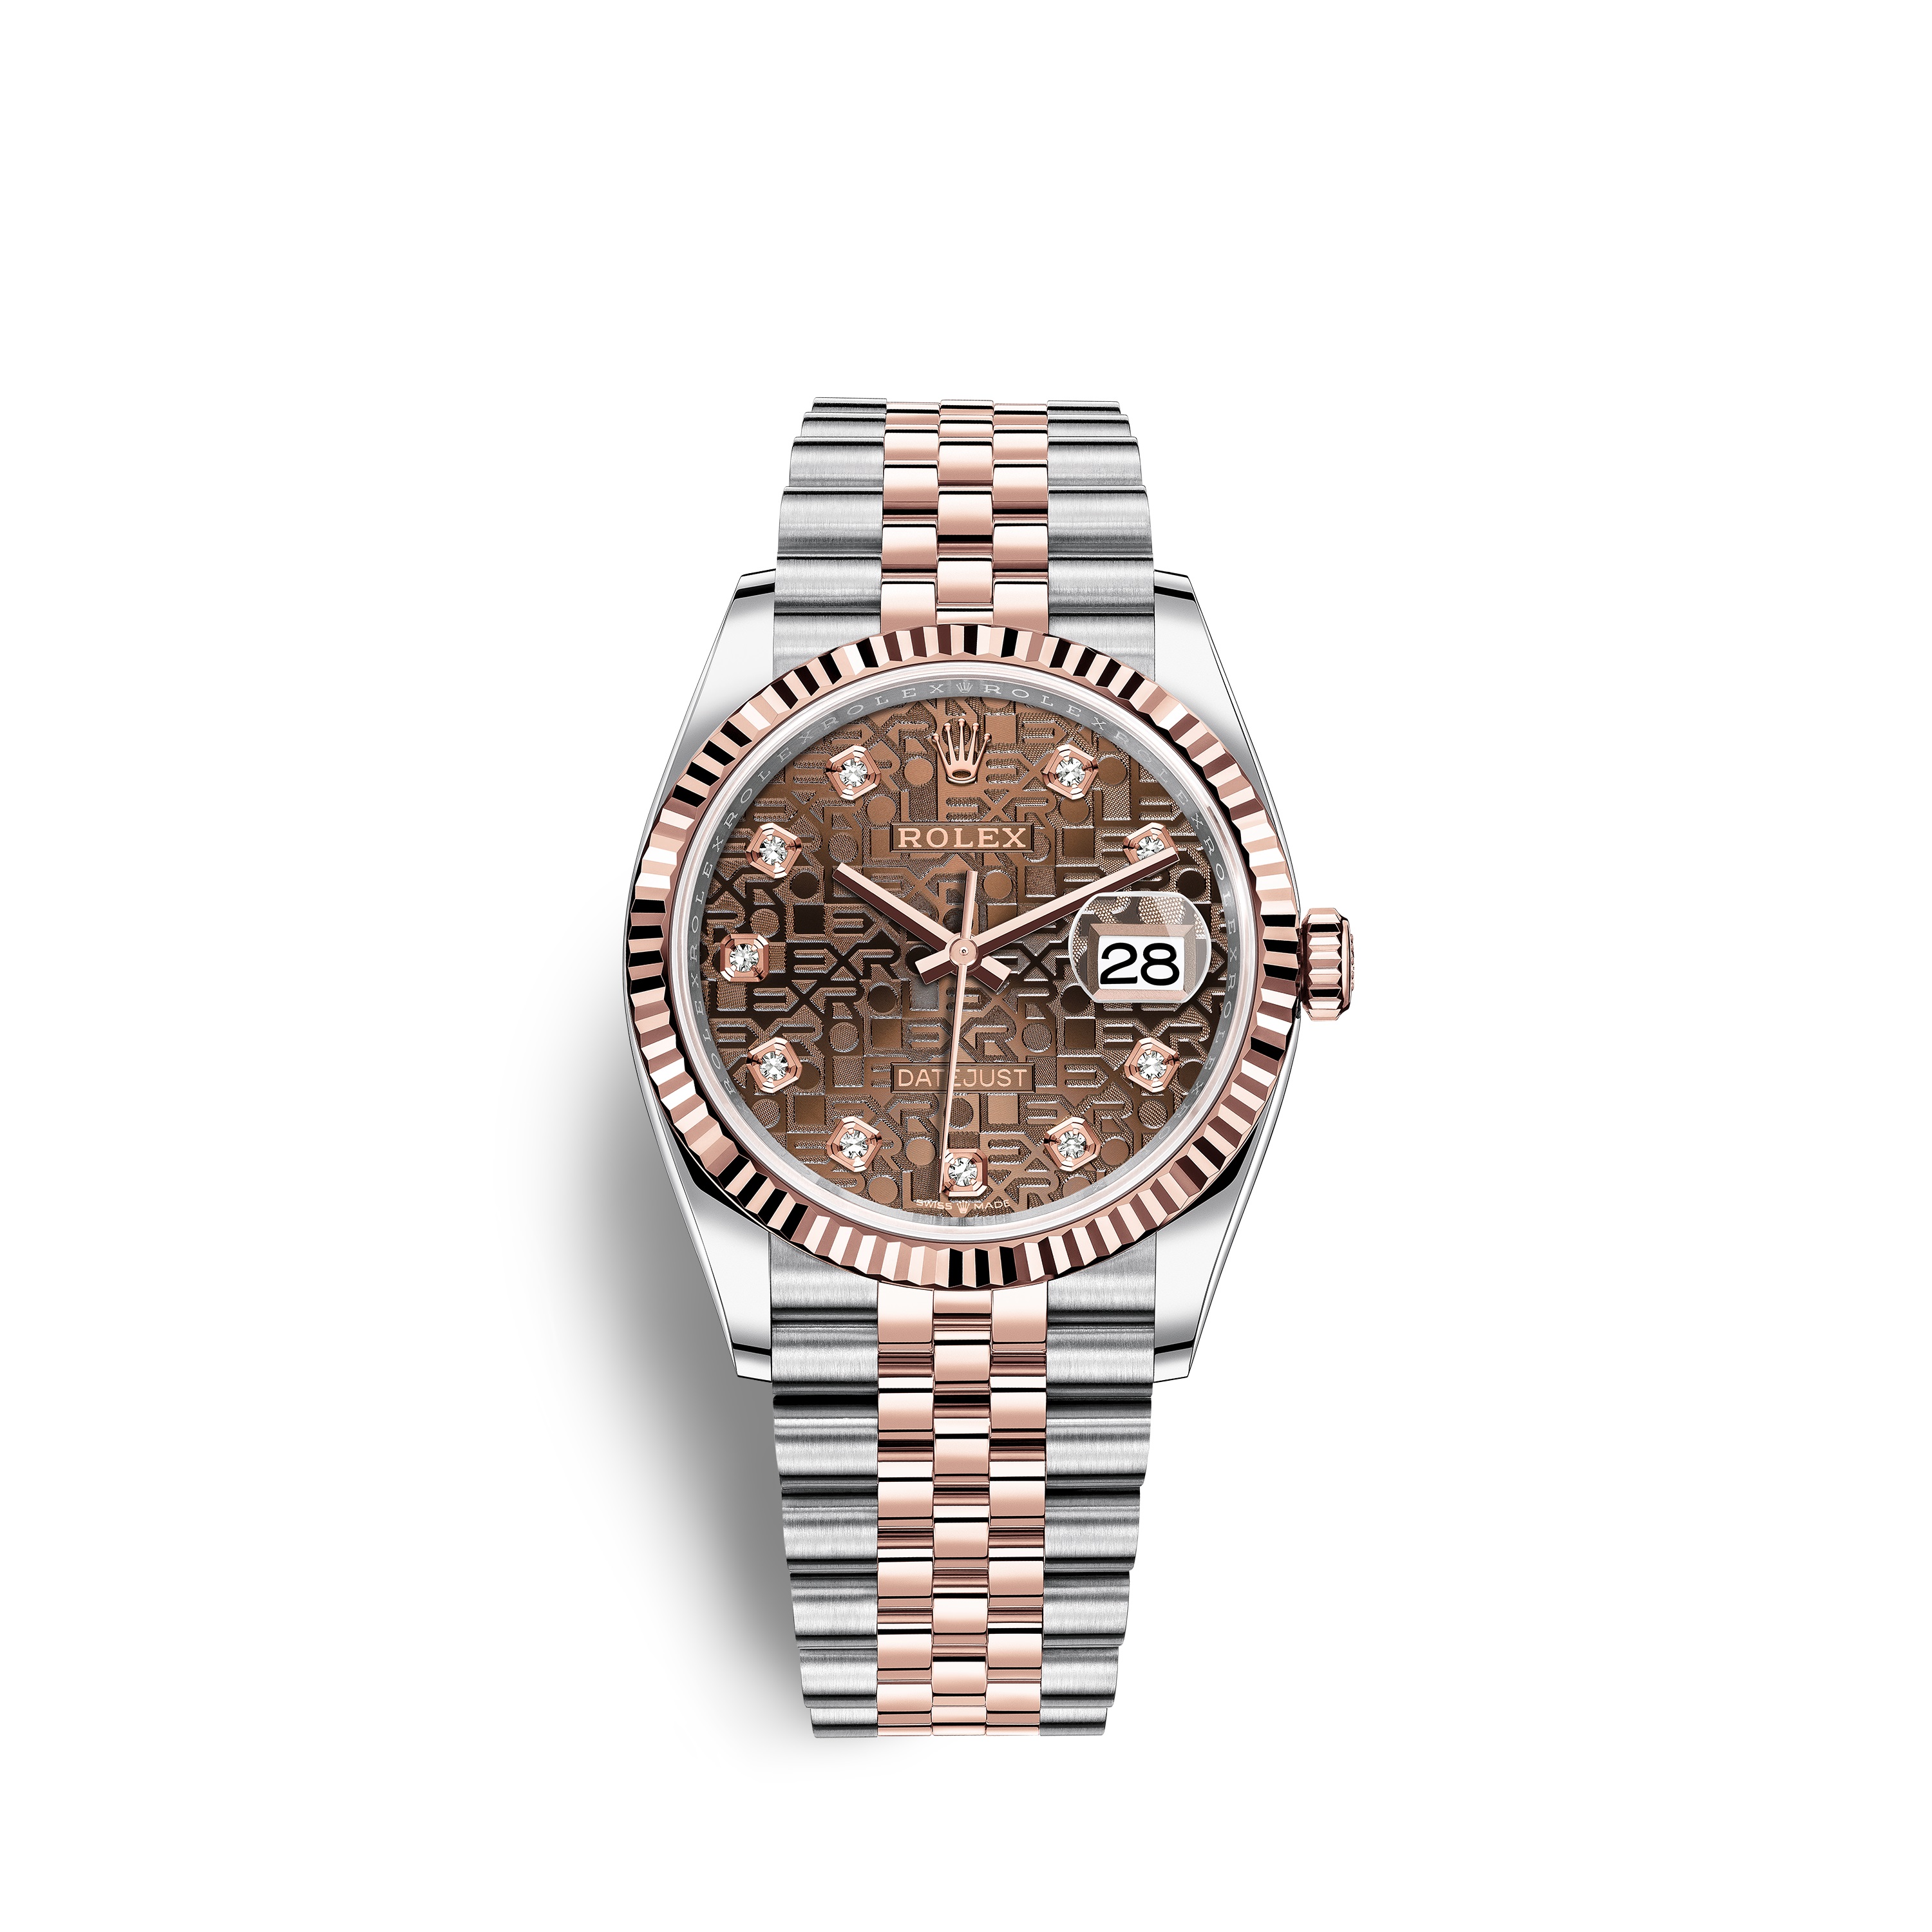 Datejust 36 126231 Rose Gold & Stainless Steel Watch (Chocolate Jubilee Design Set with Diamonds)